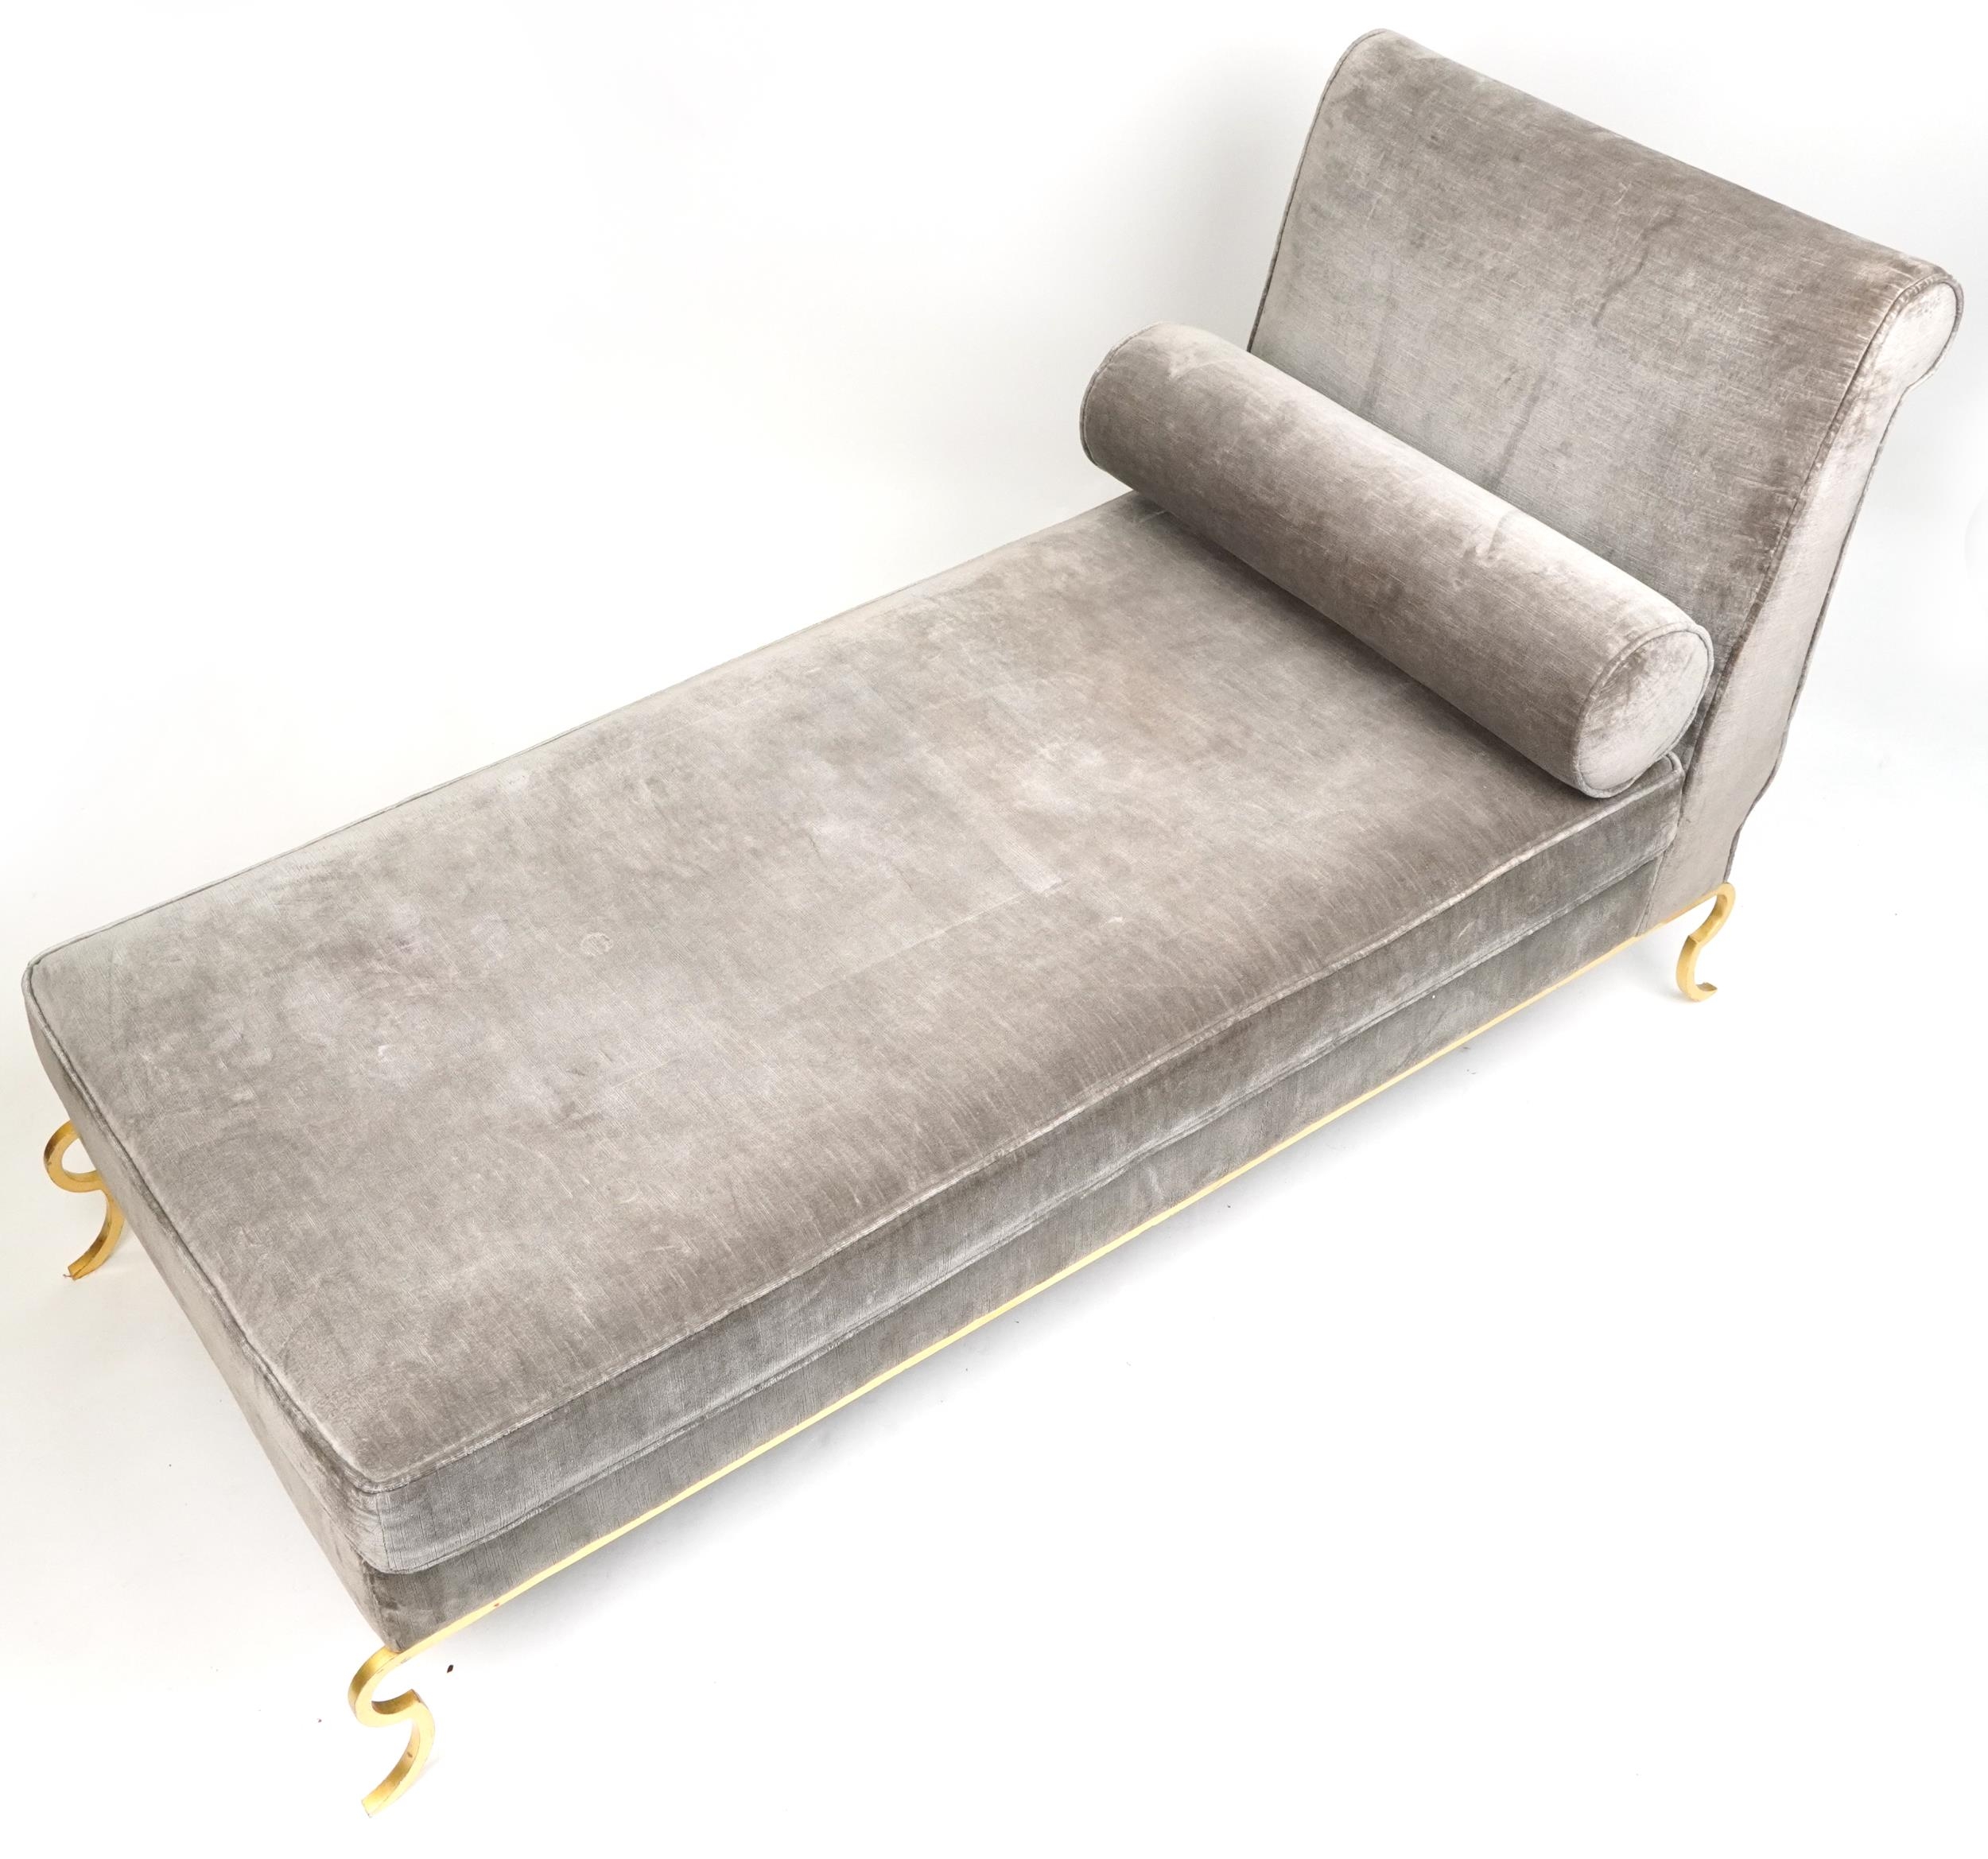 Contemporary grey upholstered chaise longue with gilt metal frame, 91cm H x 175cm W x 77cm D - Image 2 of 3